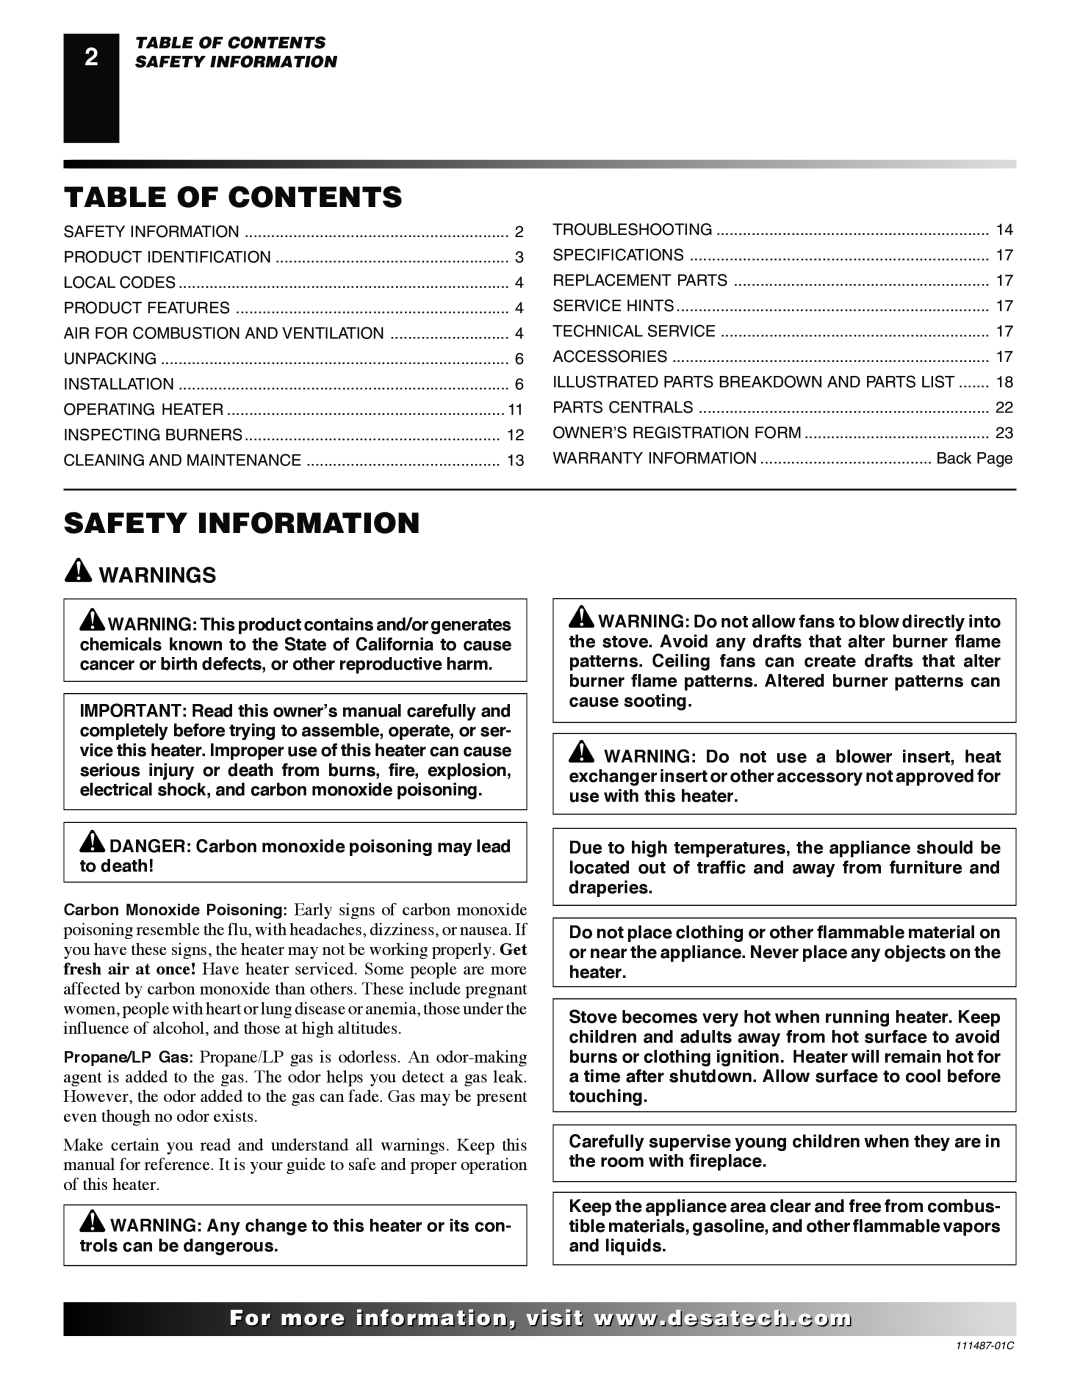 Desa CSBNT, CSPIPT Table Of Contents, Safety Information, For..com, DANGER Carbon monoxide poisoning may lead to death 